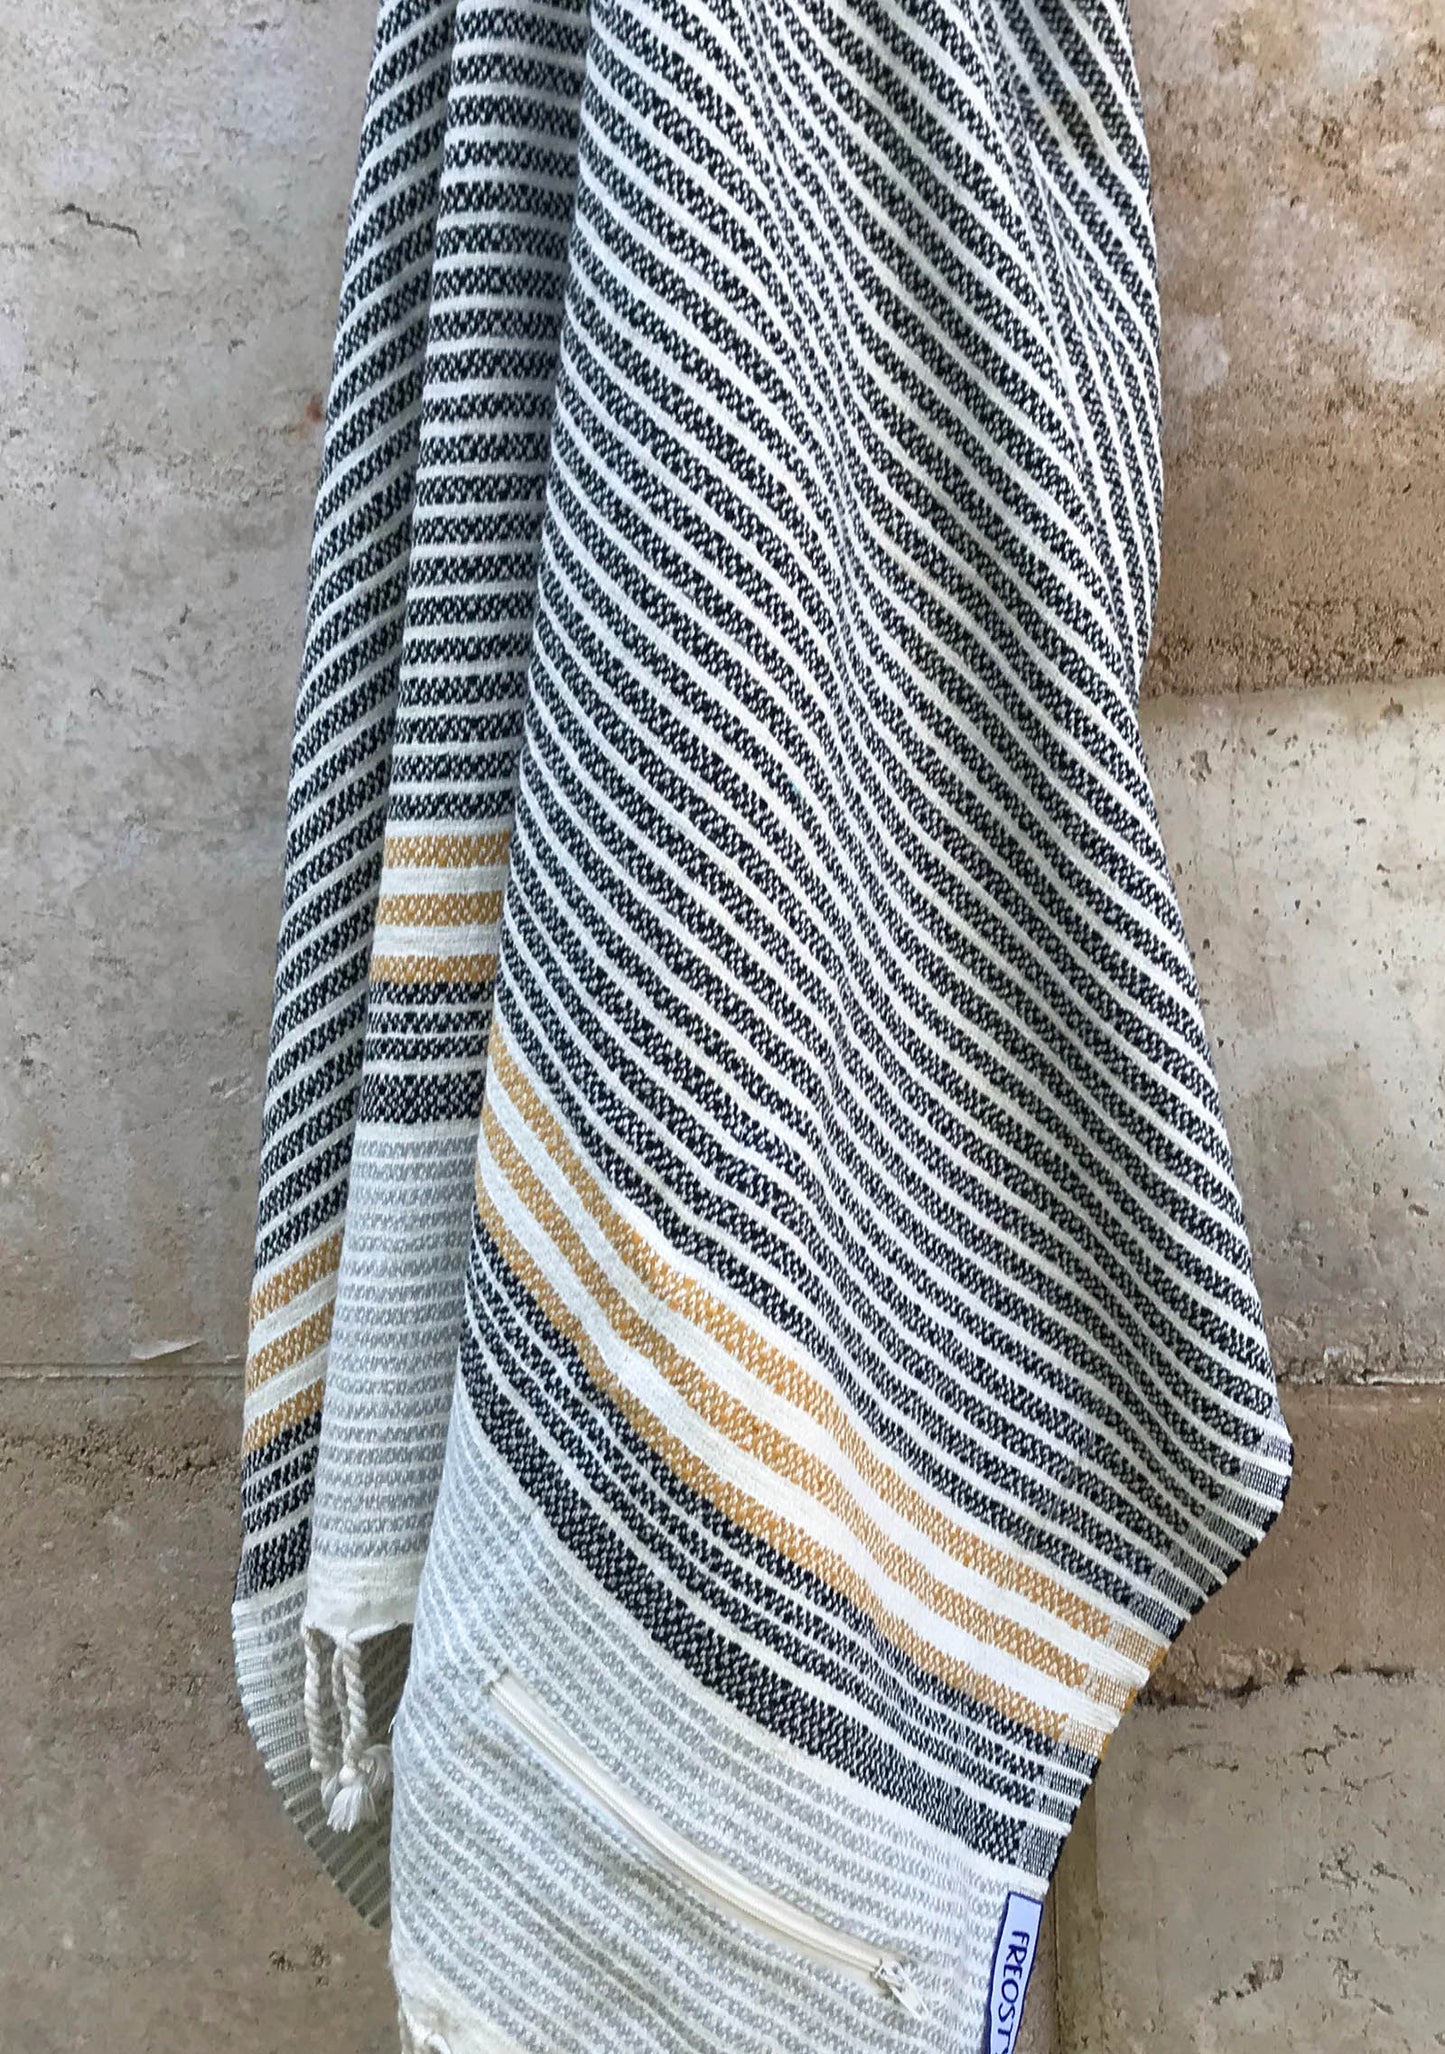 Zante Turkish Towel with Pockets, close up, sustainable bear gear from Freostyle, hung